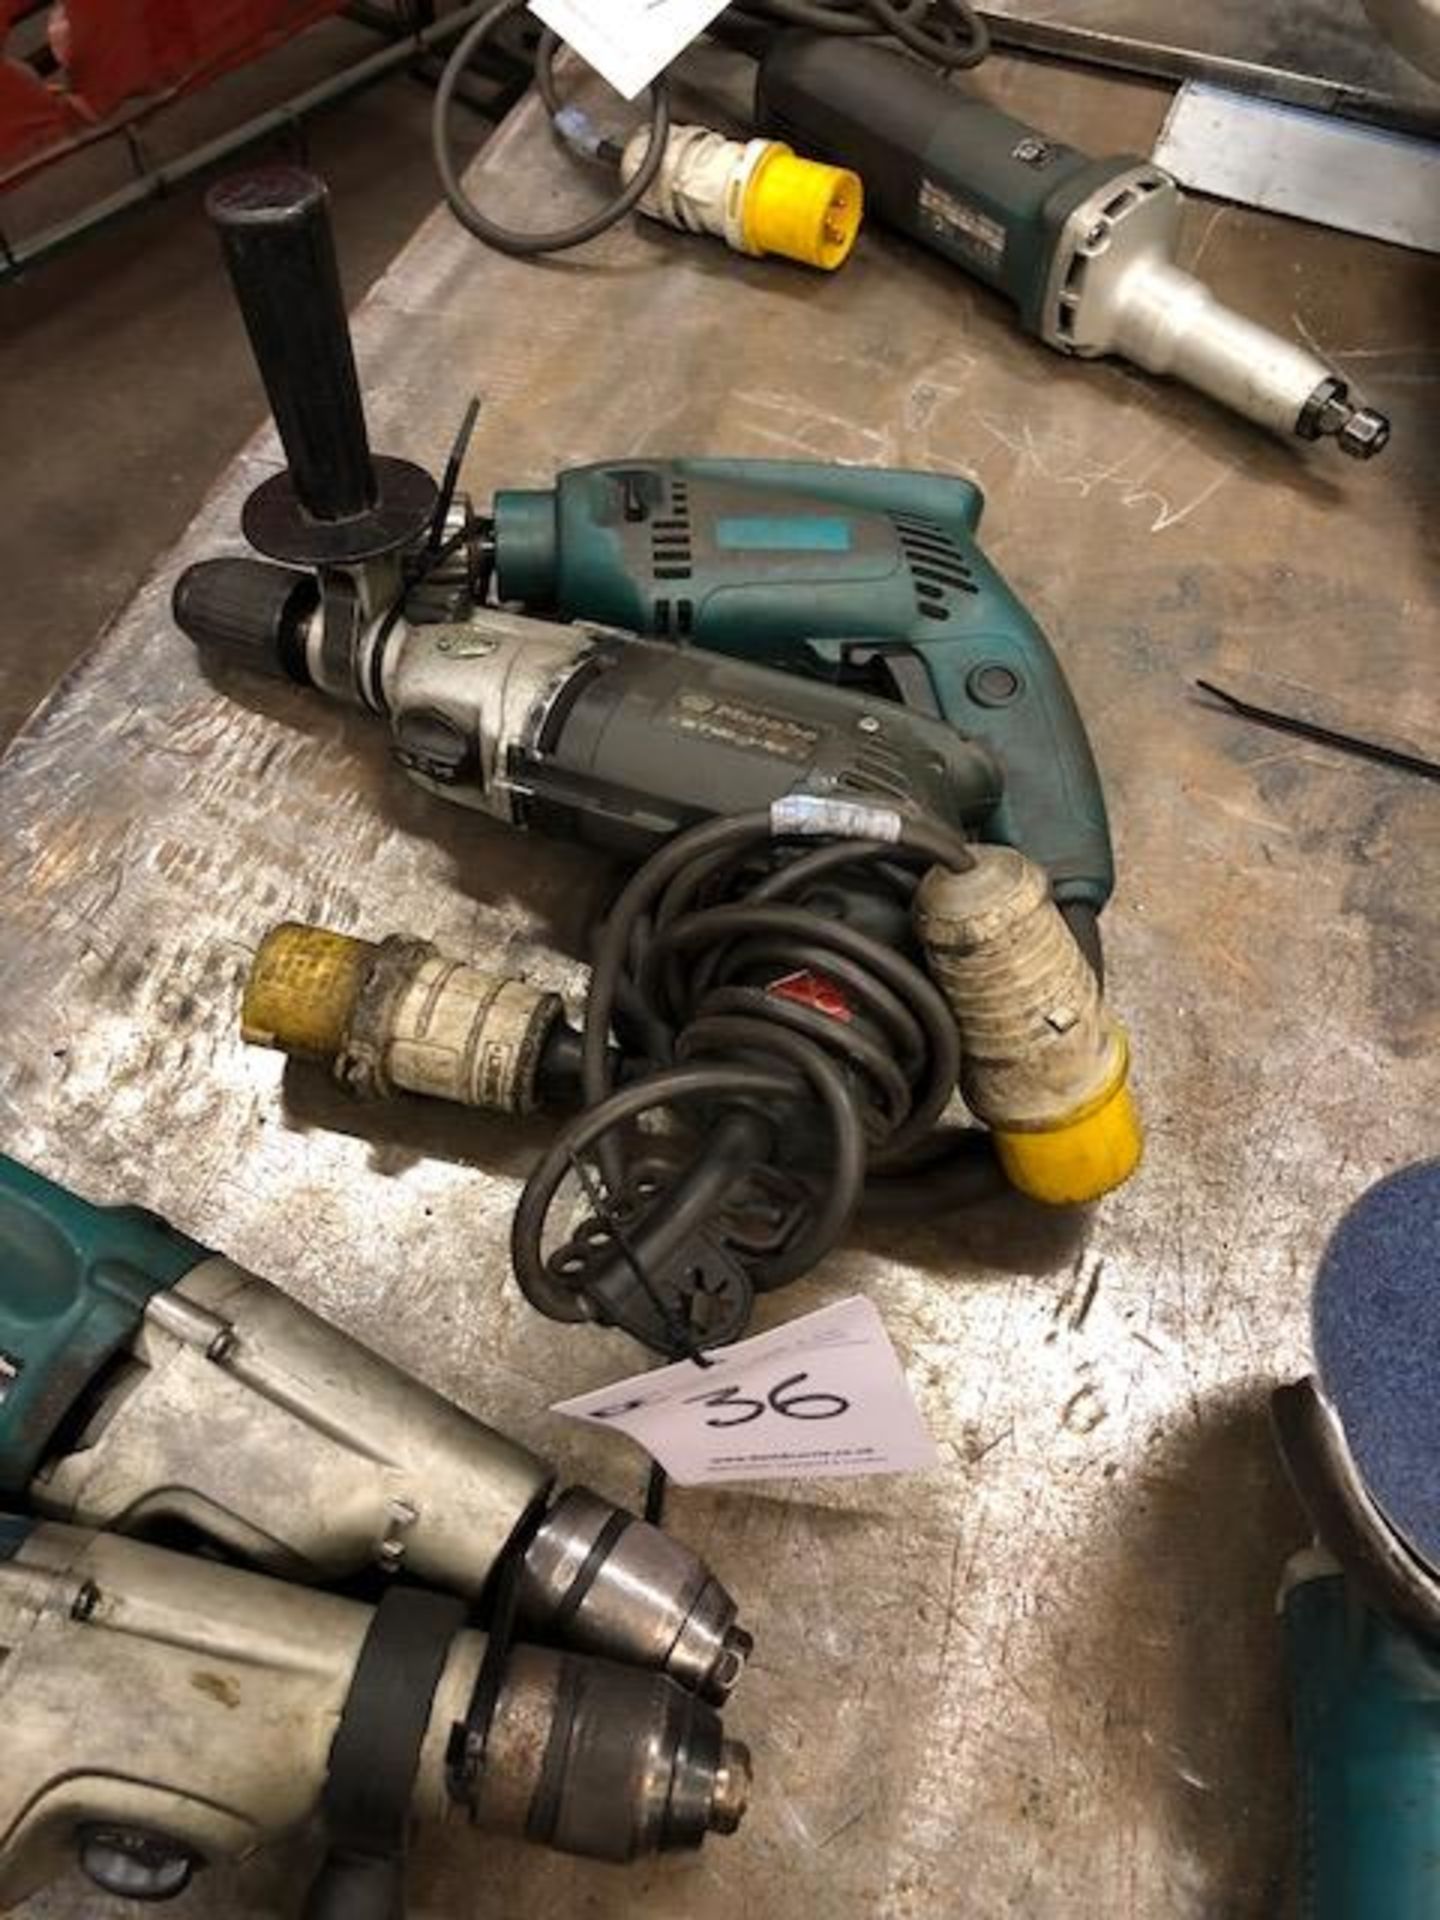 METABO SBE 680 impact drill and similar drill of unknown manufacture